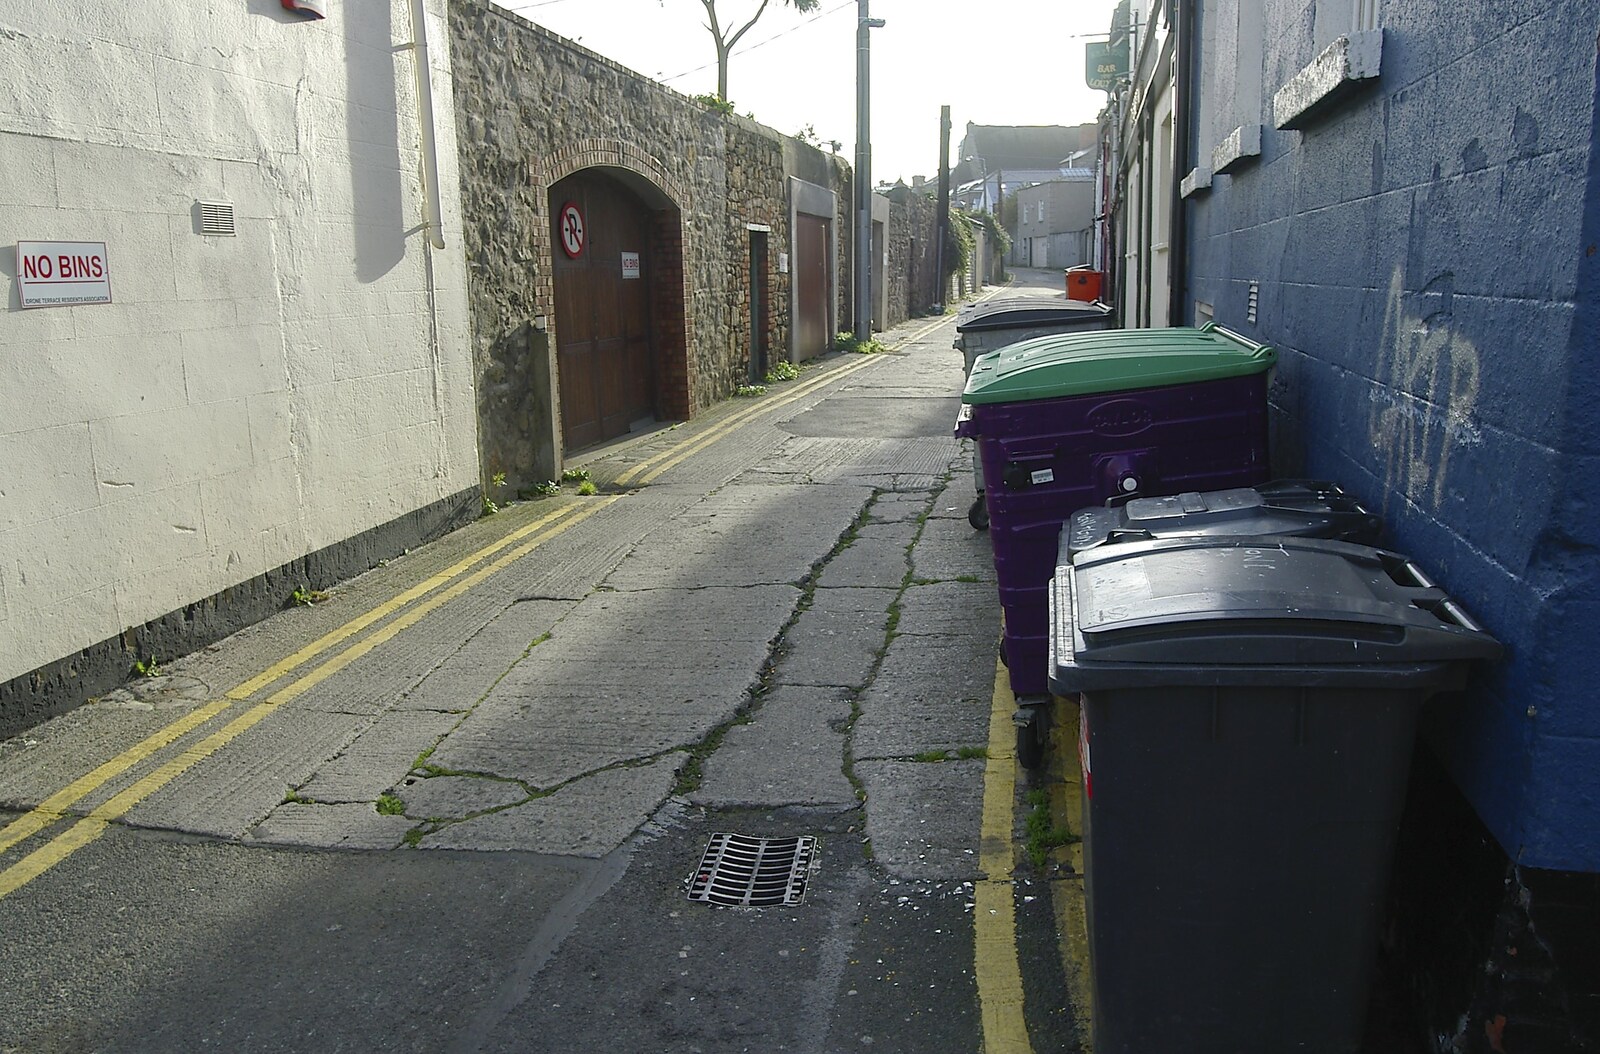 Wheelie bins face off to a 'no bins' sign from Blackrock Mornings, Dublin County, Ireland - 29th October 2006